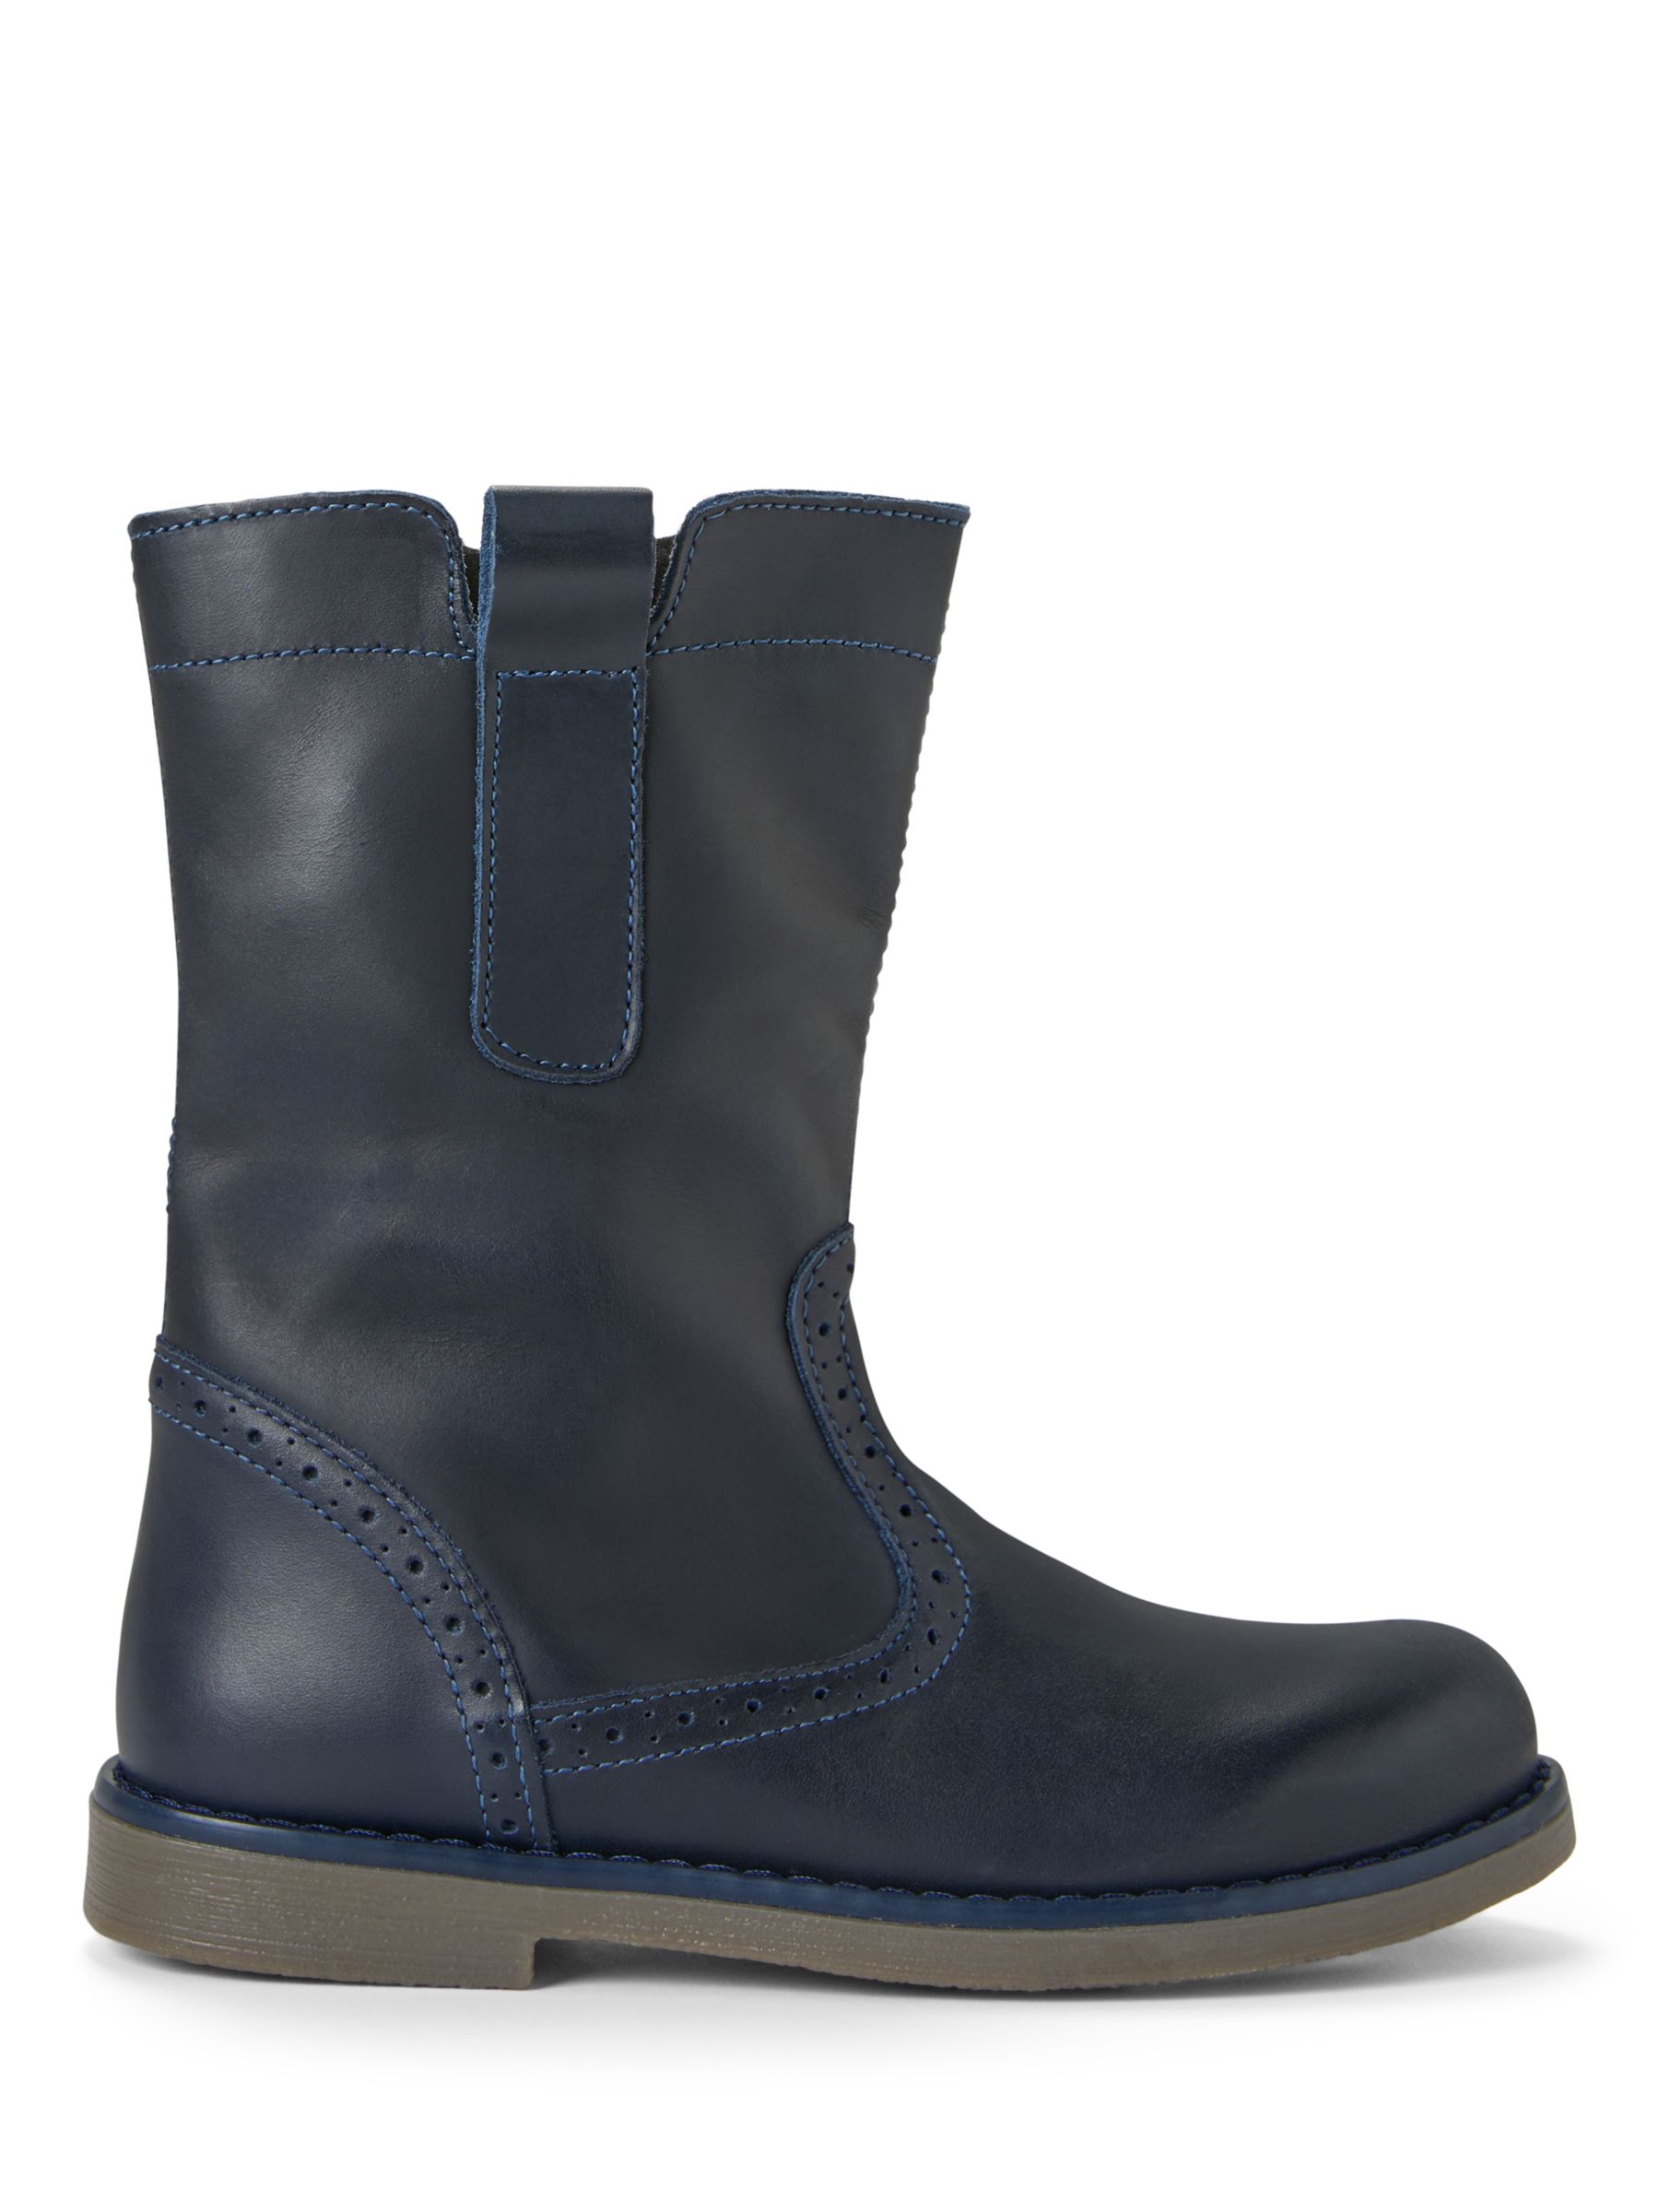 John Lewis & Partners Children&#39;s Isobel Leather Boots, Navy at John Lewis & Partners